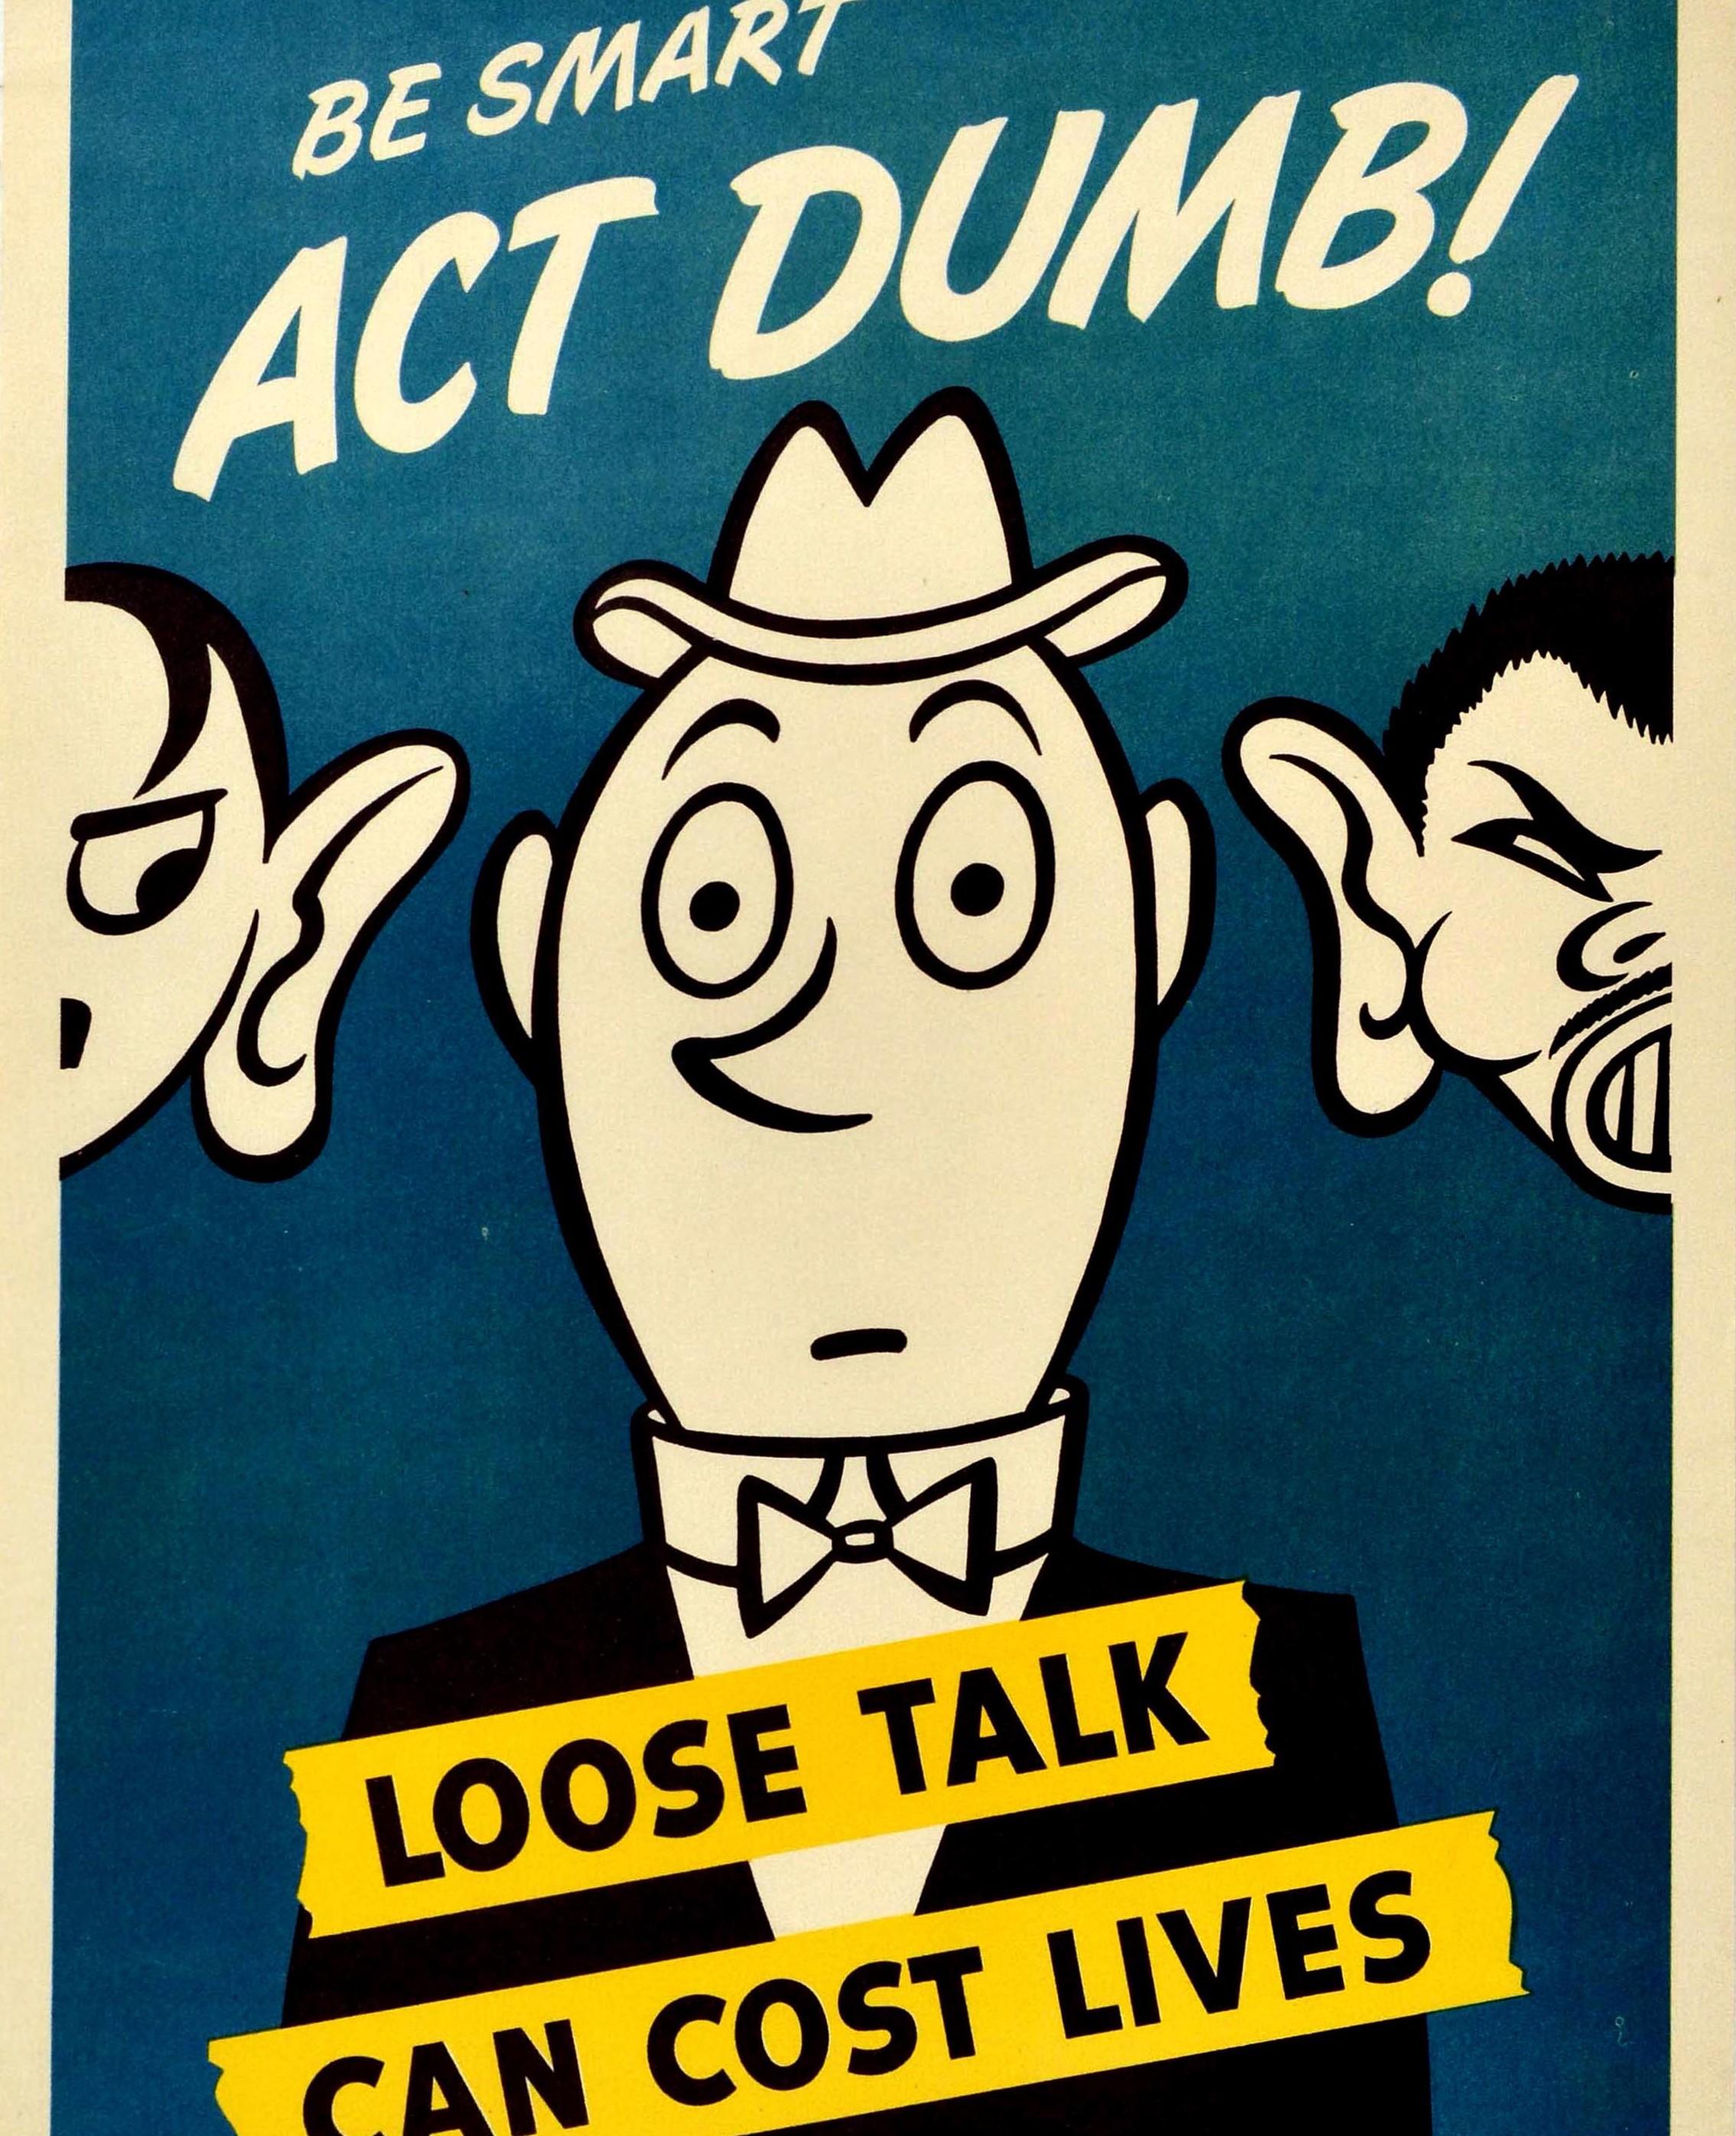 Original Vintage Poster Be Smart Act Dumb Loose Talk Can Cost Lives WWII Defense - Orange Print by O. Soglow